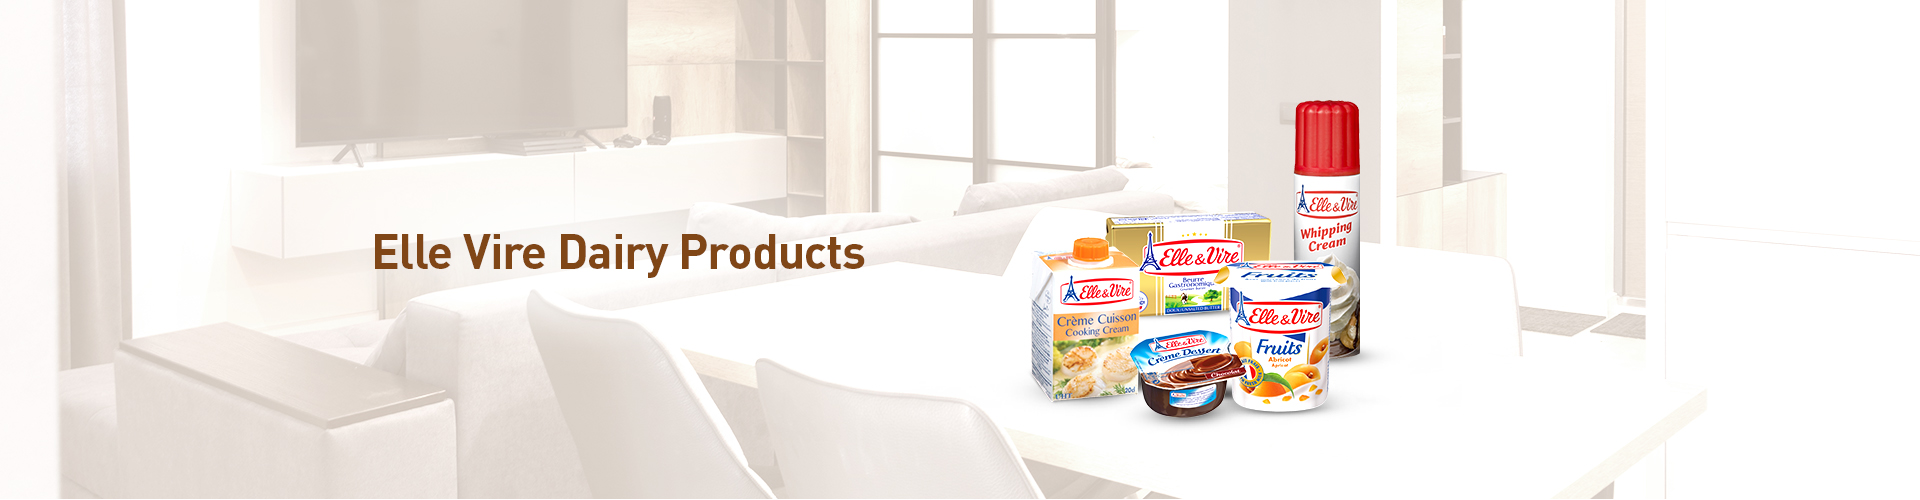 Elle & Vire Dairy Products